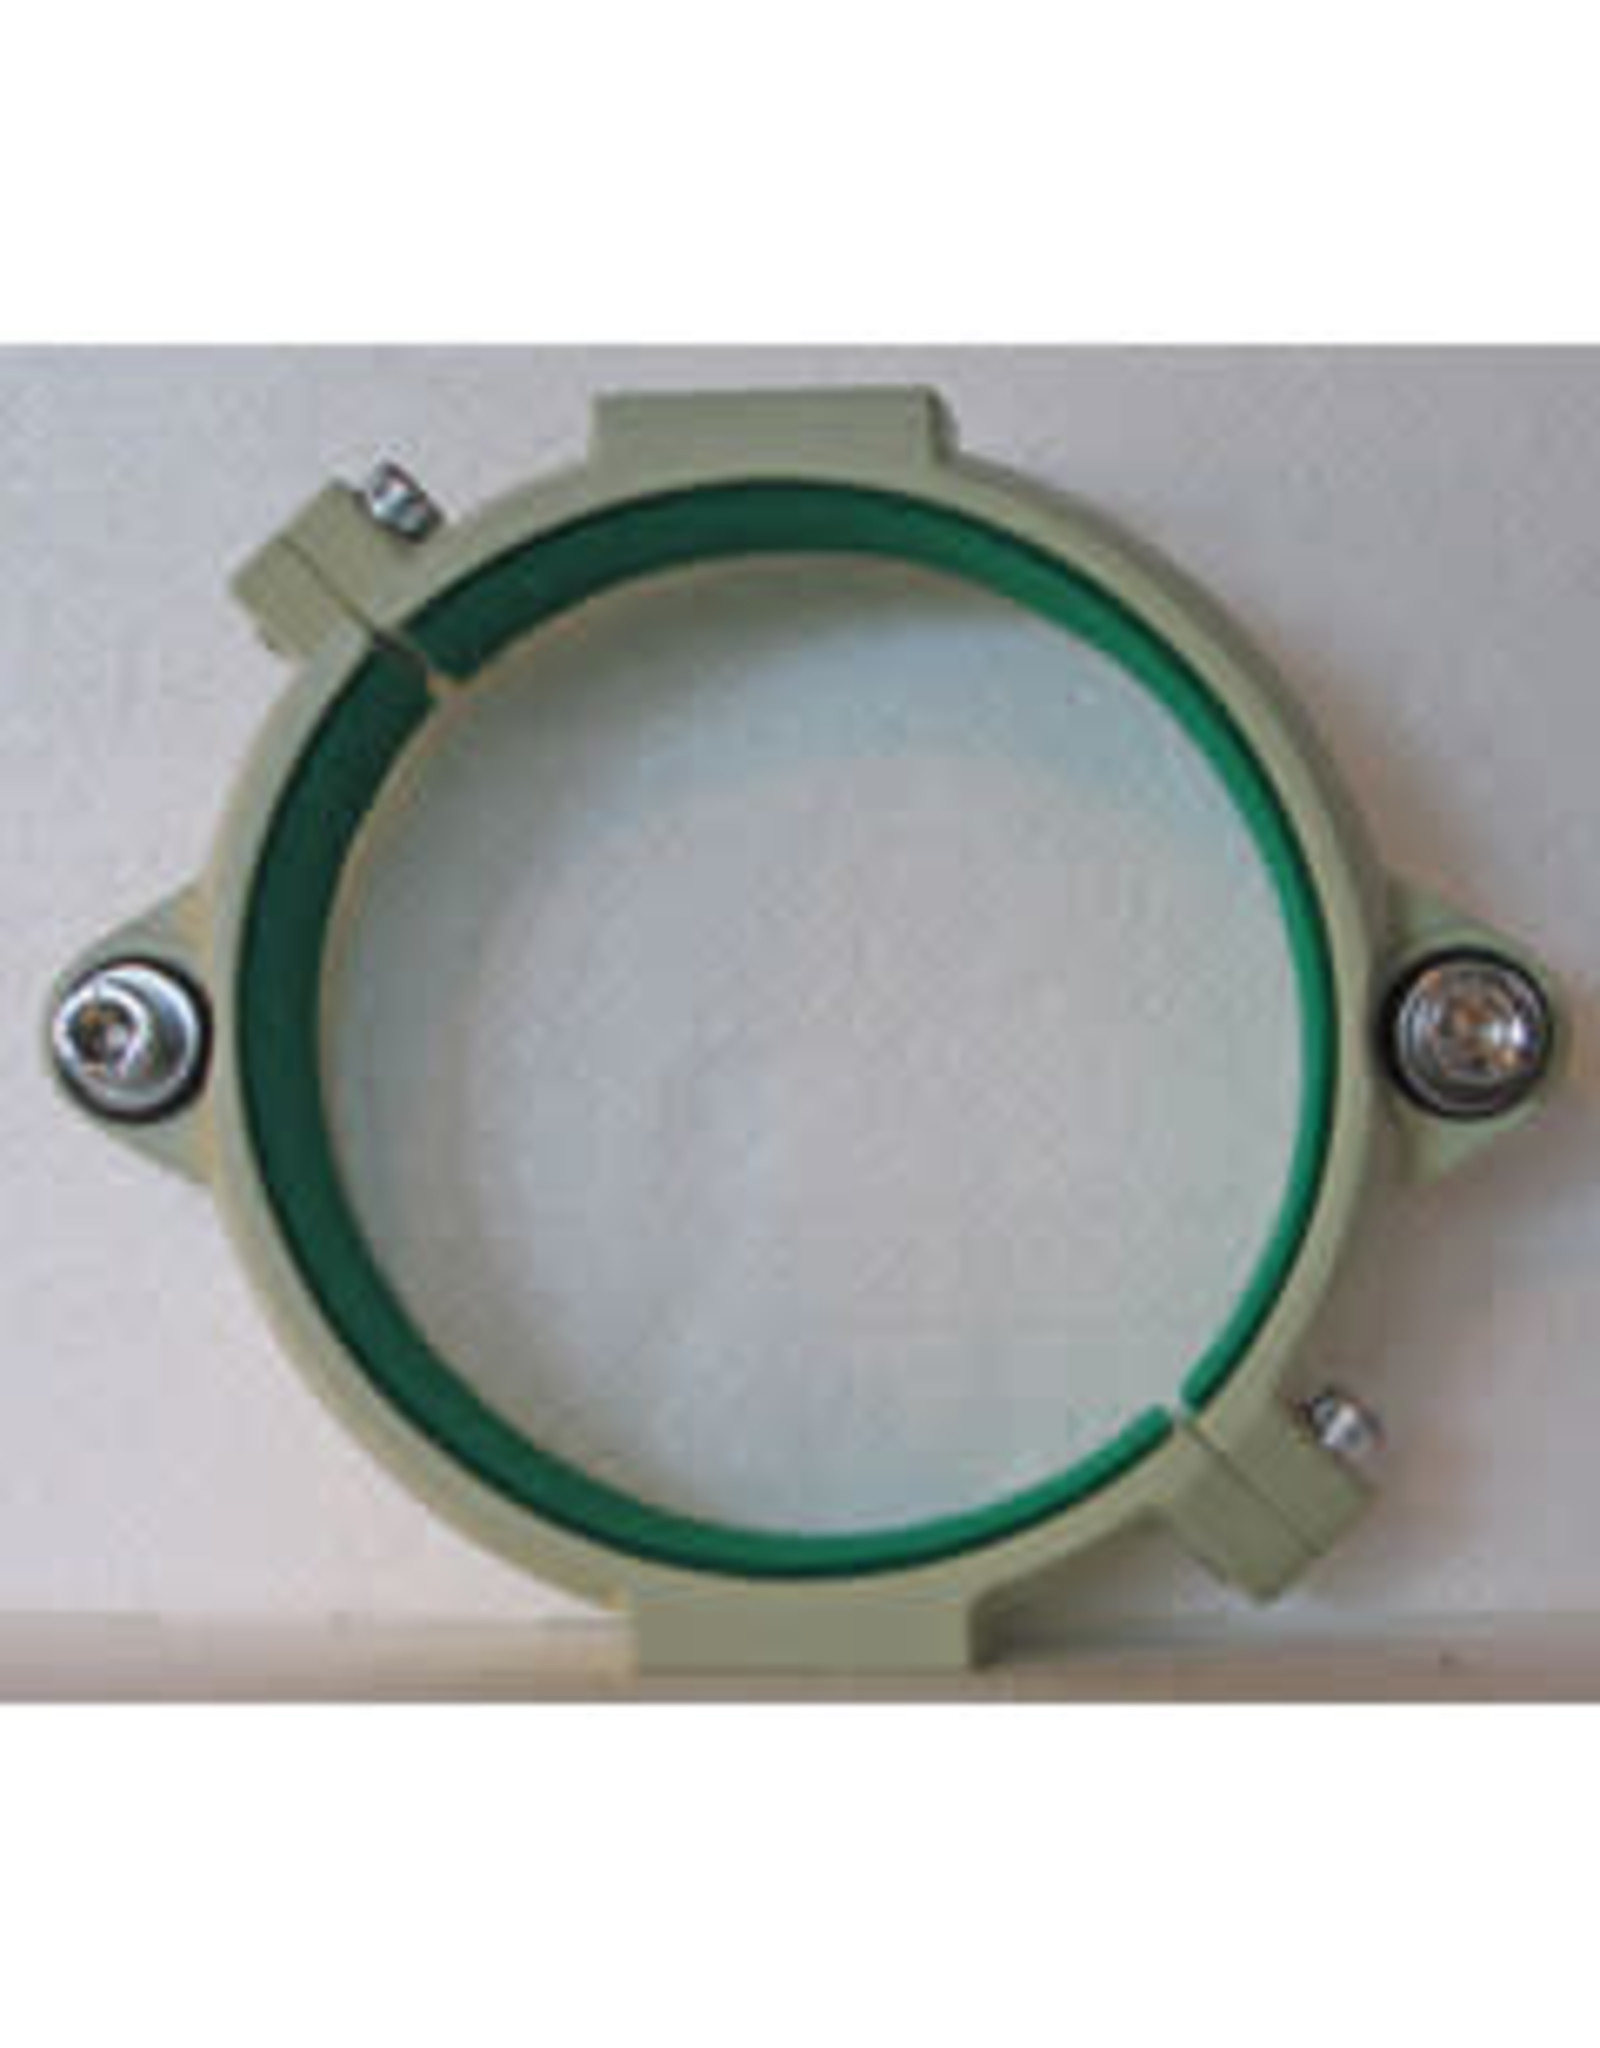 Takahashi Takahashi accessory ring holder for TOA-130 S or F, FS-152 or 155mm ID aperture tubes